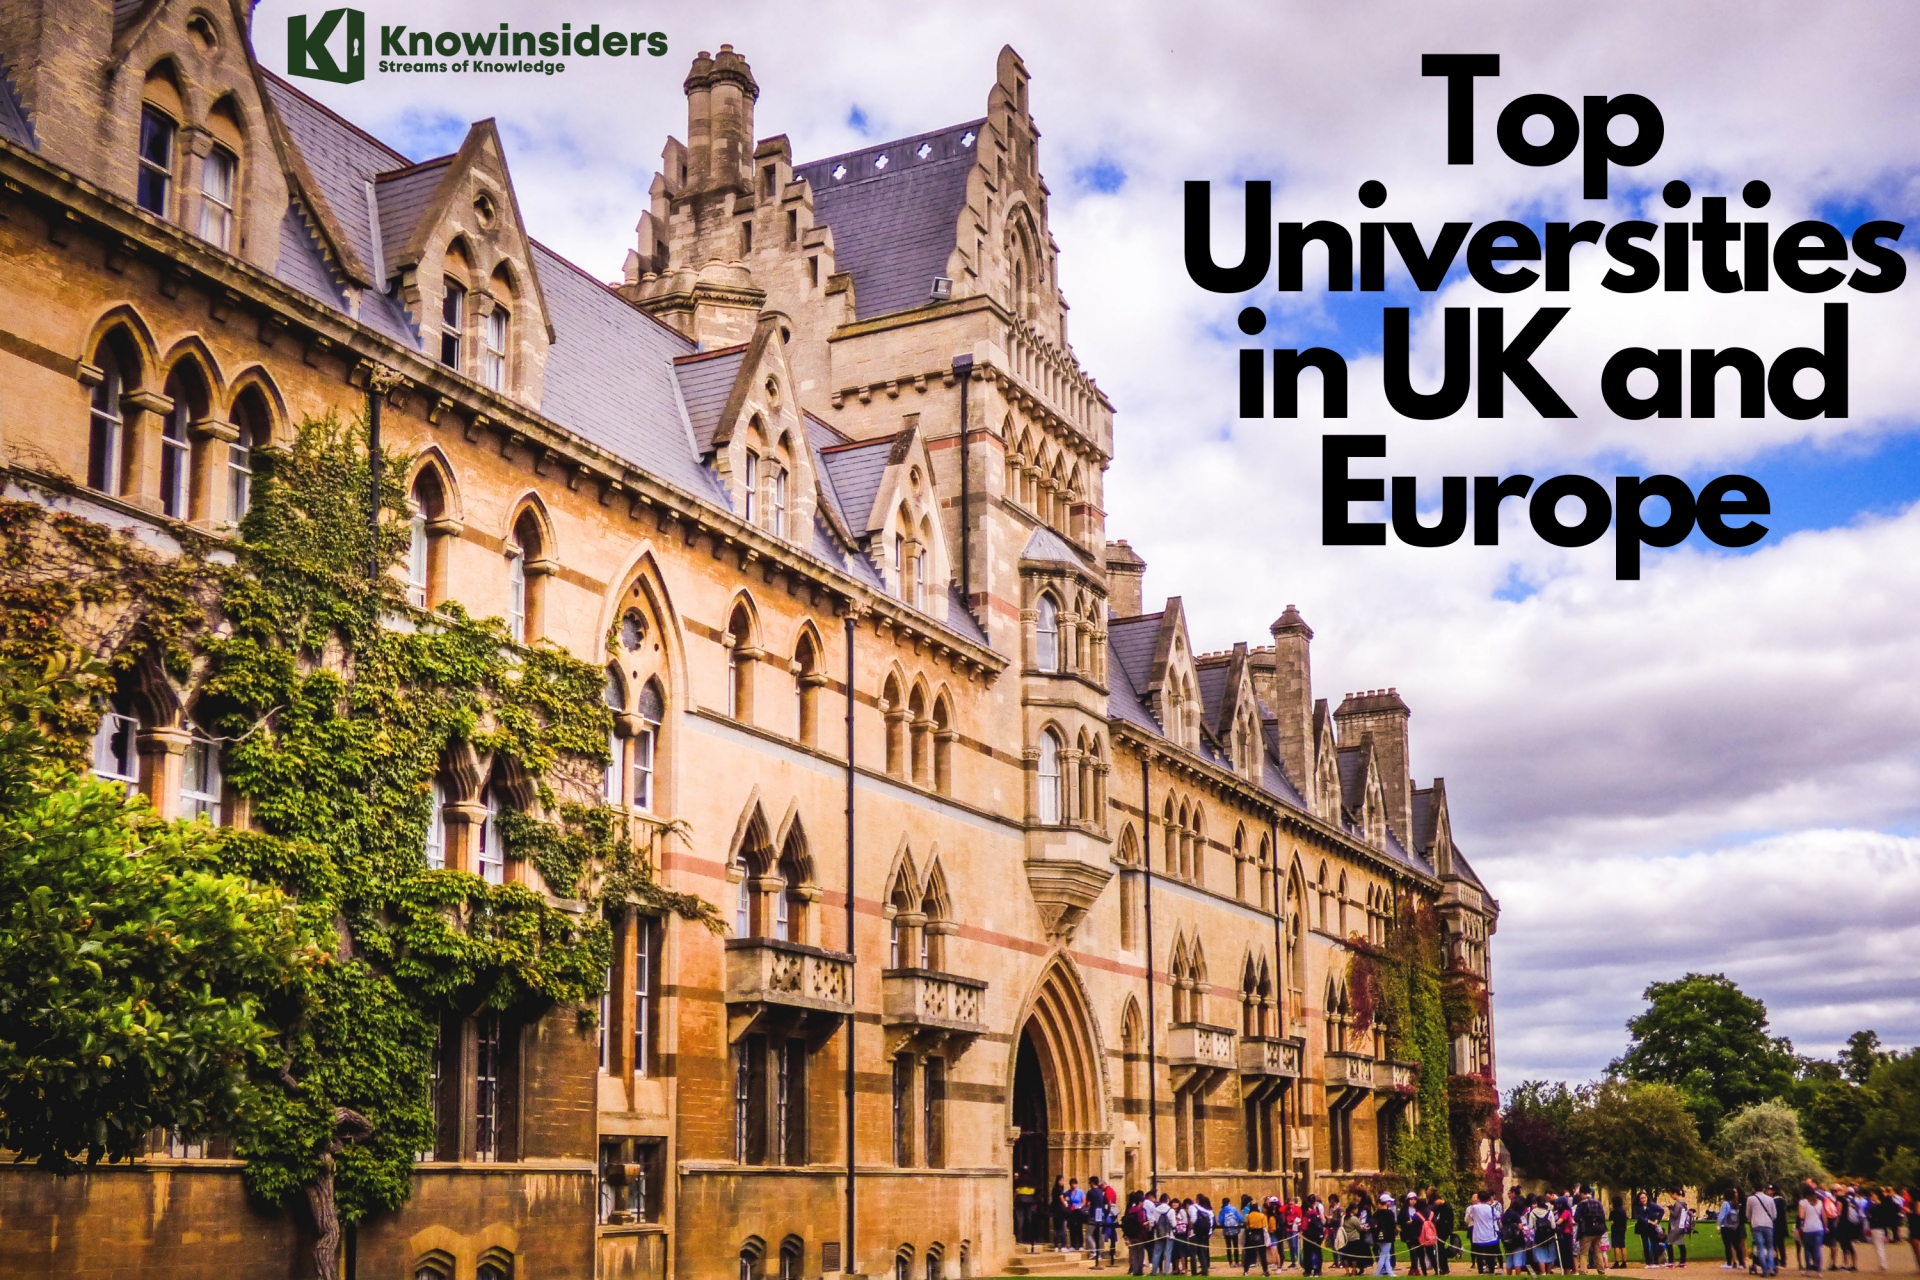 Top 10 Most Prestigious Universities In UK And Europe Today - by QS